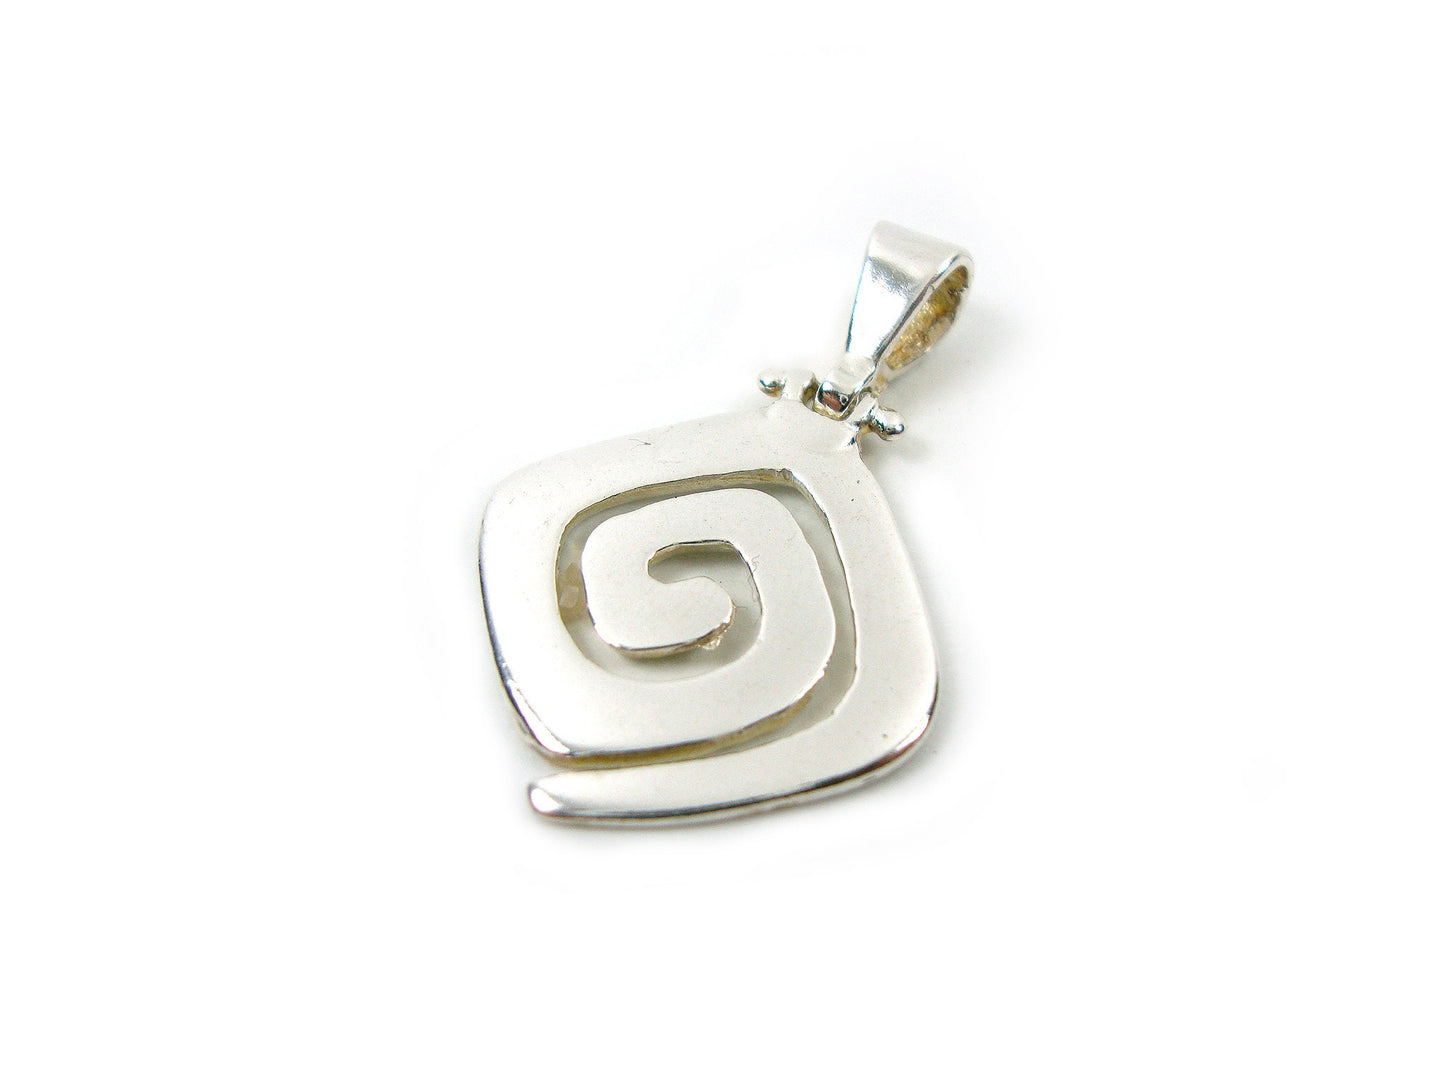 Greek Spiral Pendant From Greece with 15% OFF and free shipping.